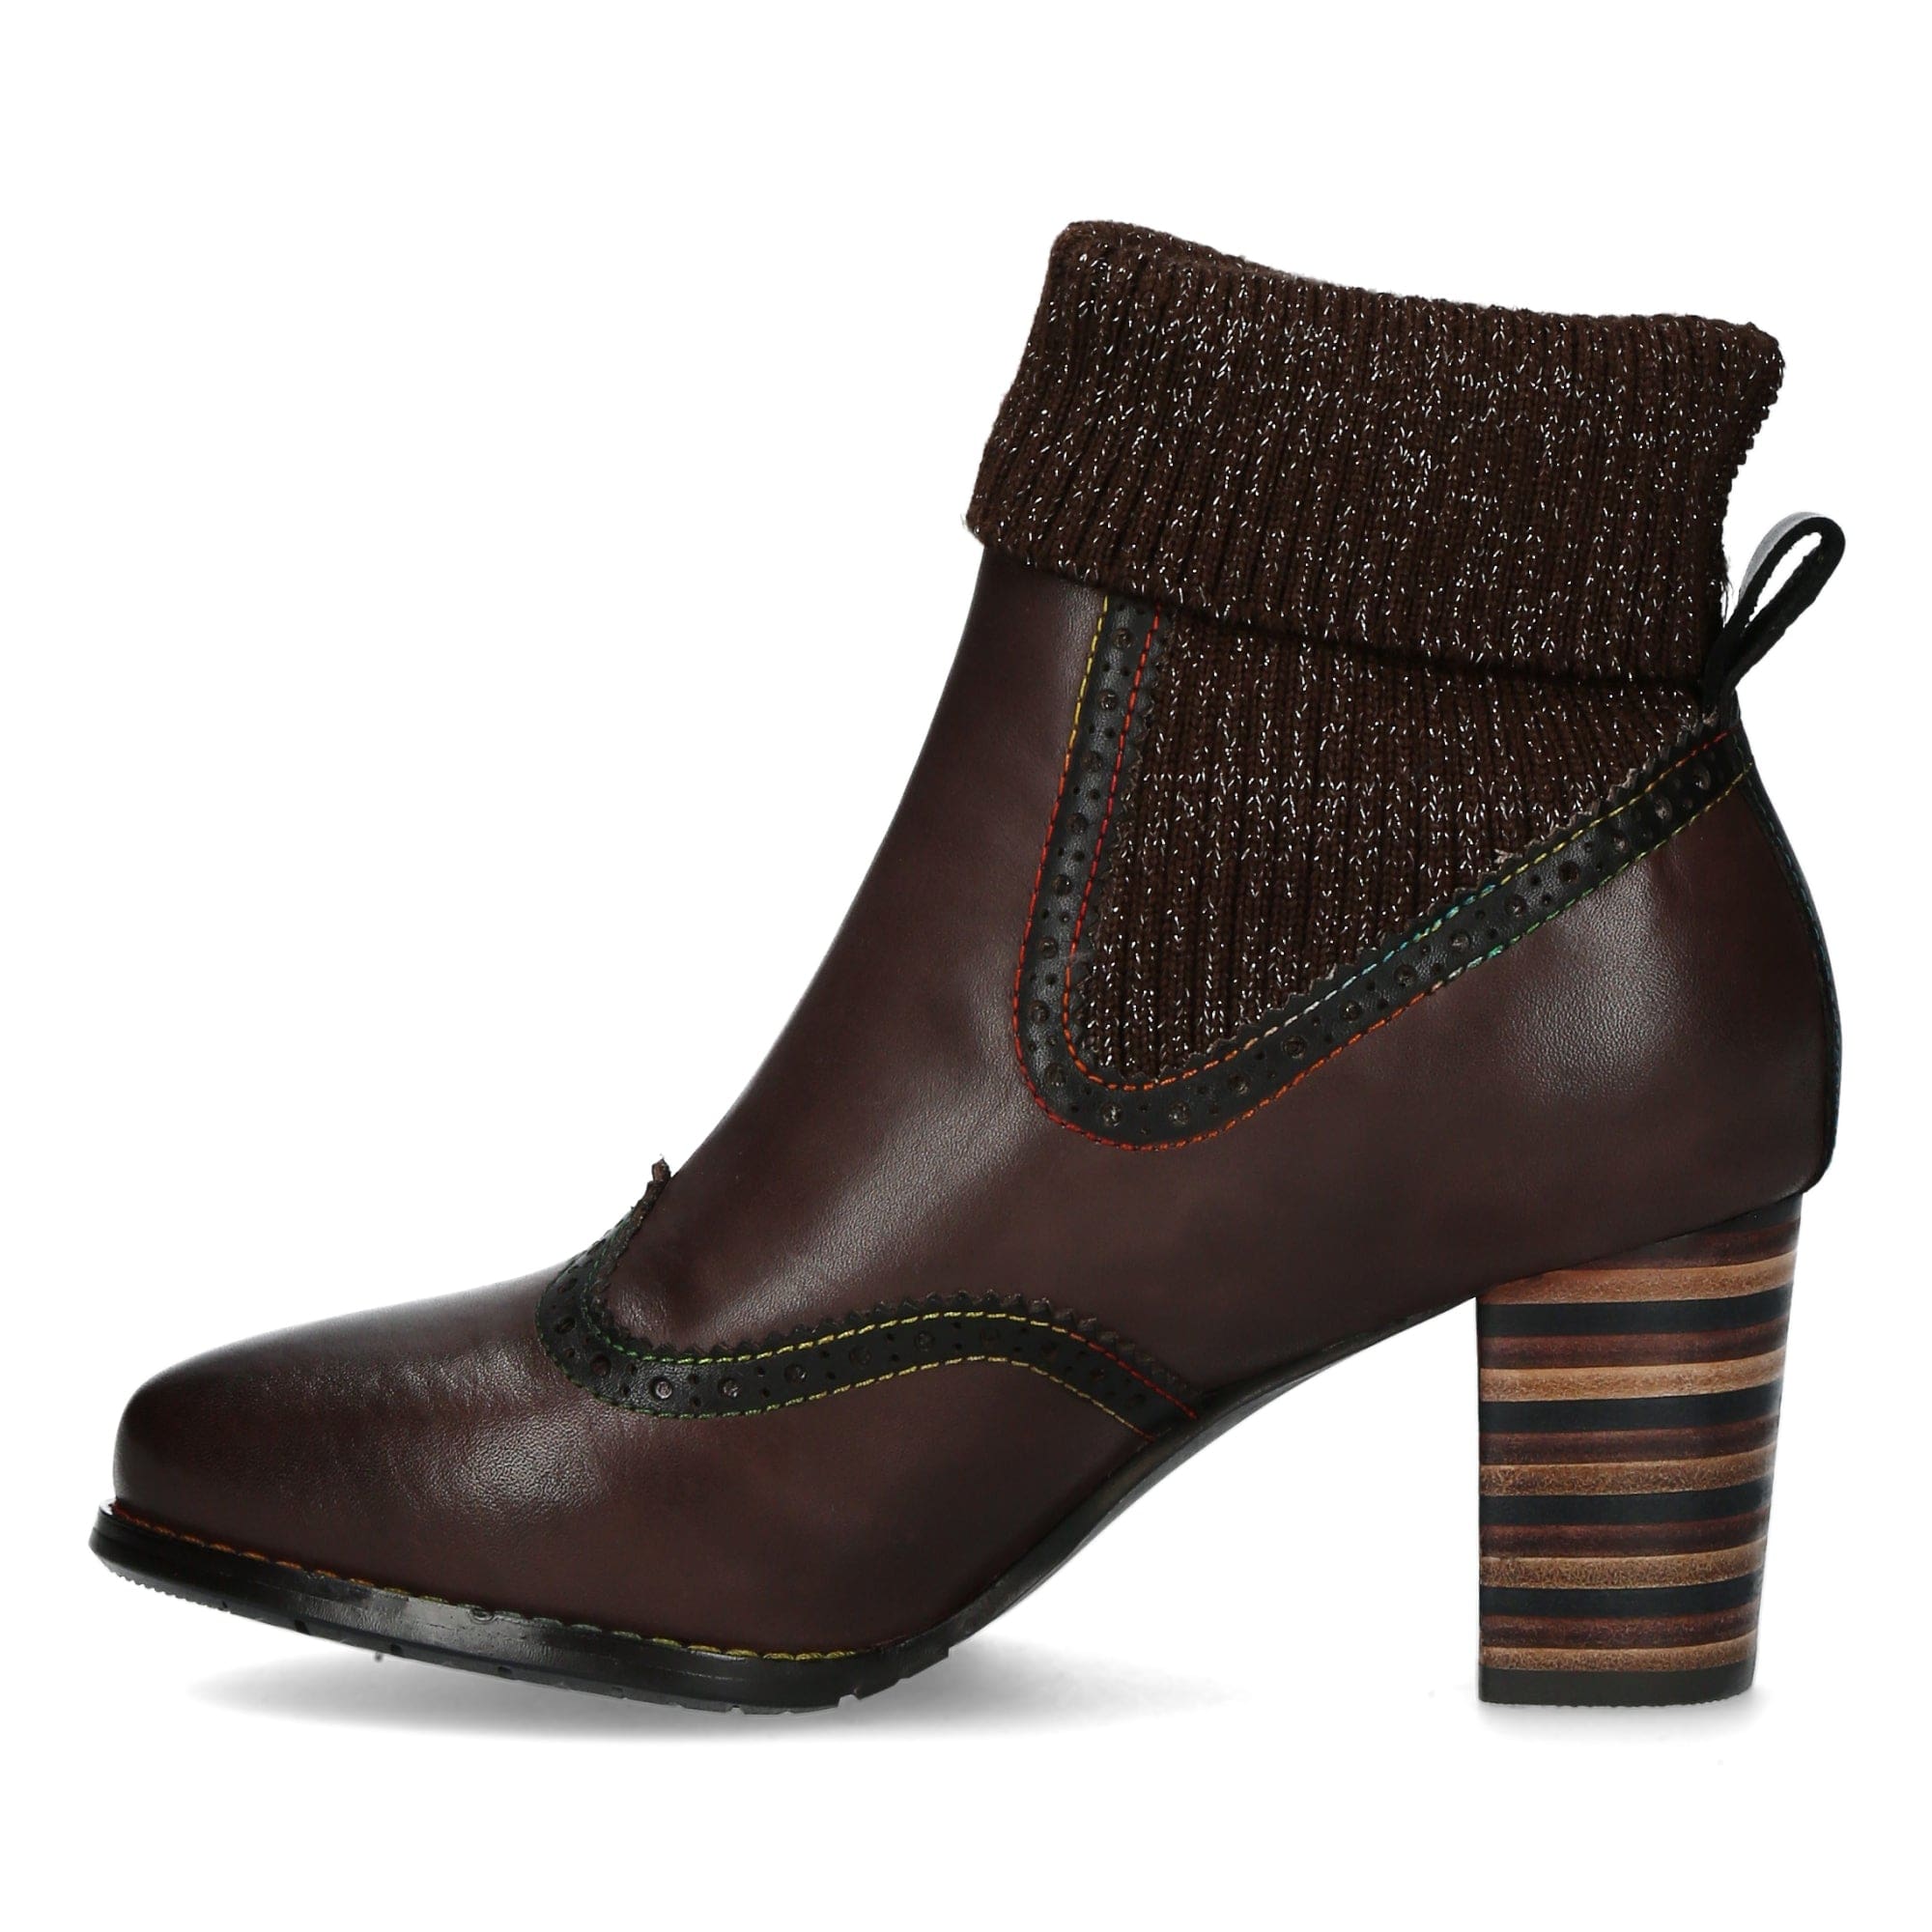 Chaussure ANCGIEO 21 - Boots